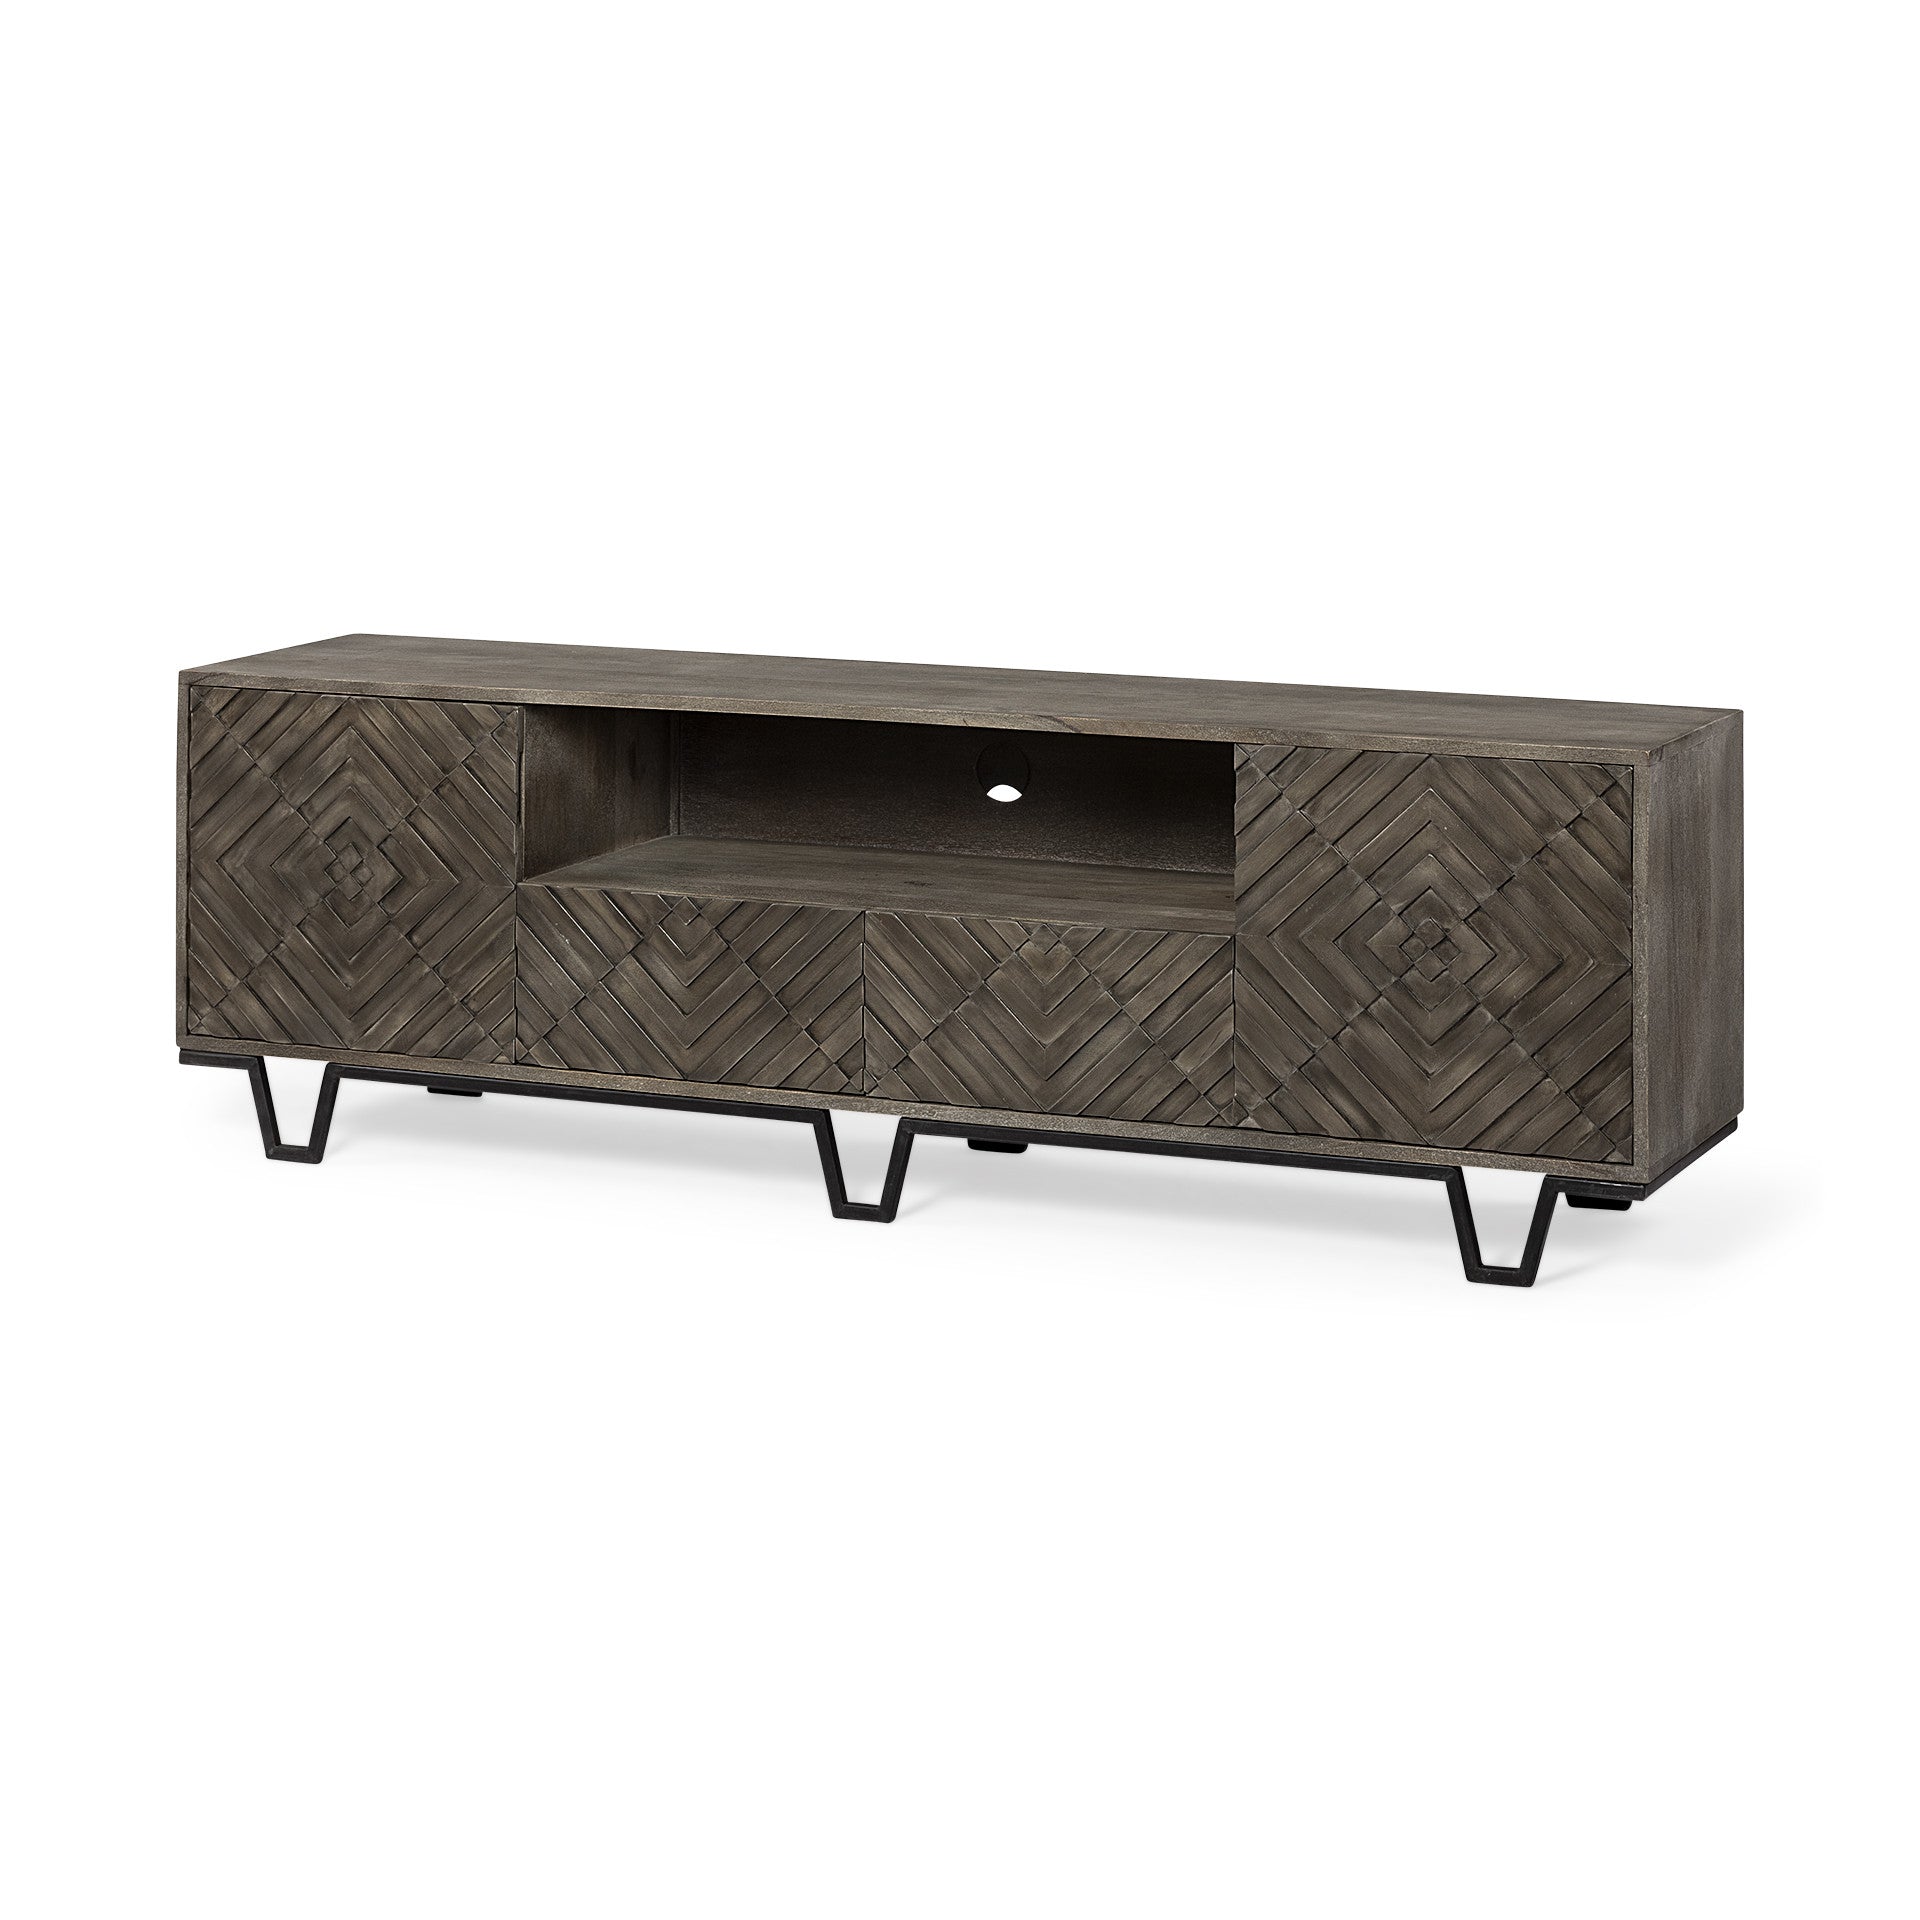 Medium Brown Wood TV Stand Media Console With 4 Doors And Small Media Shelf